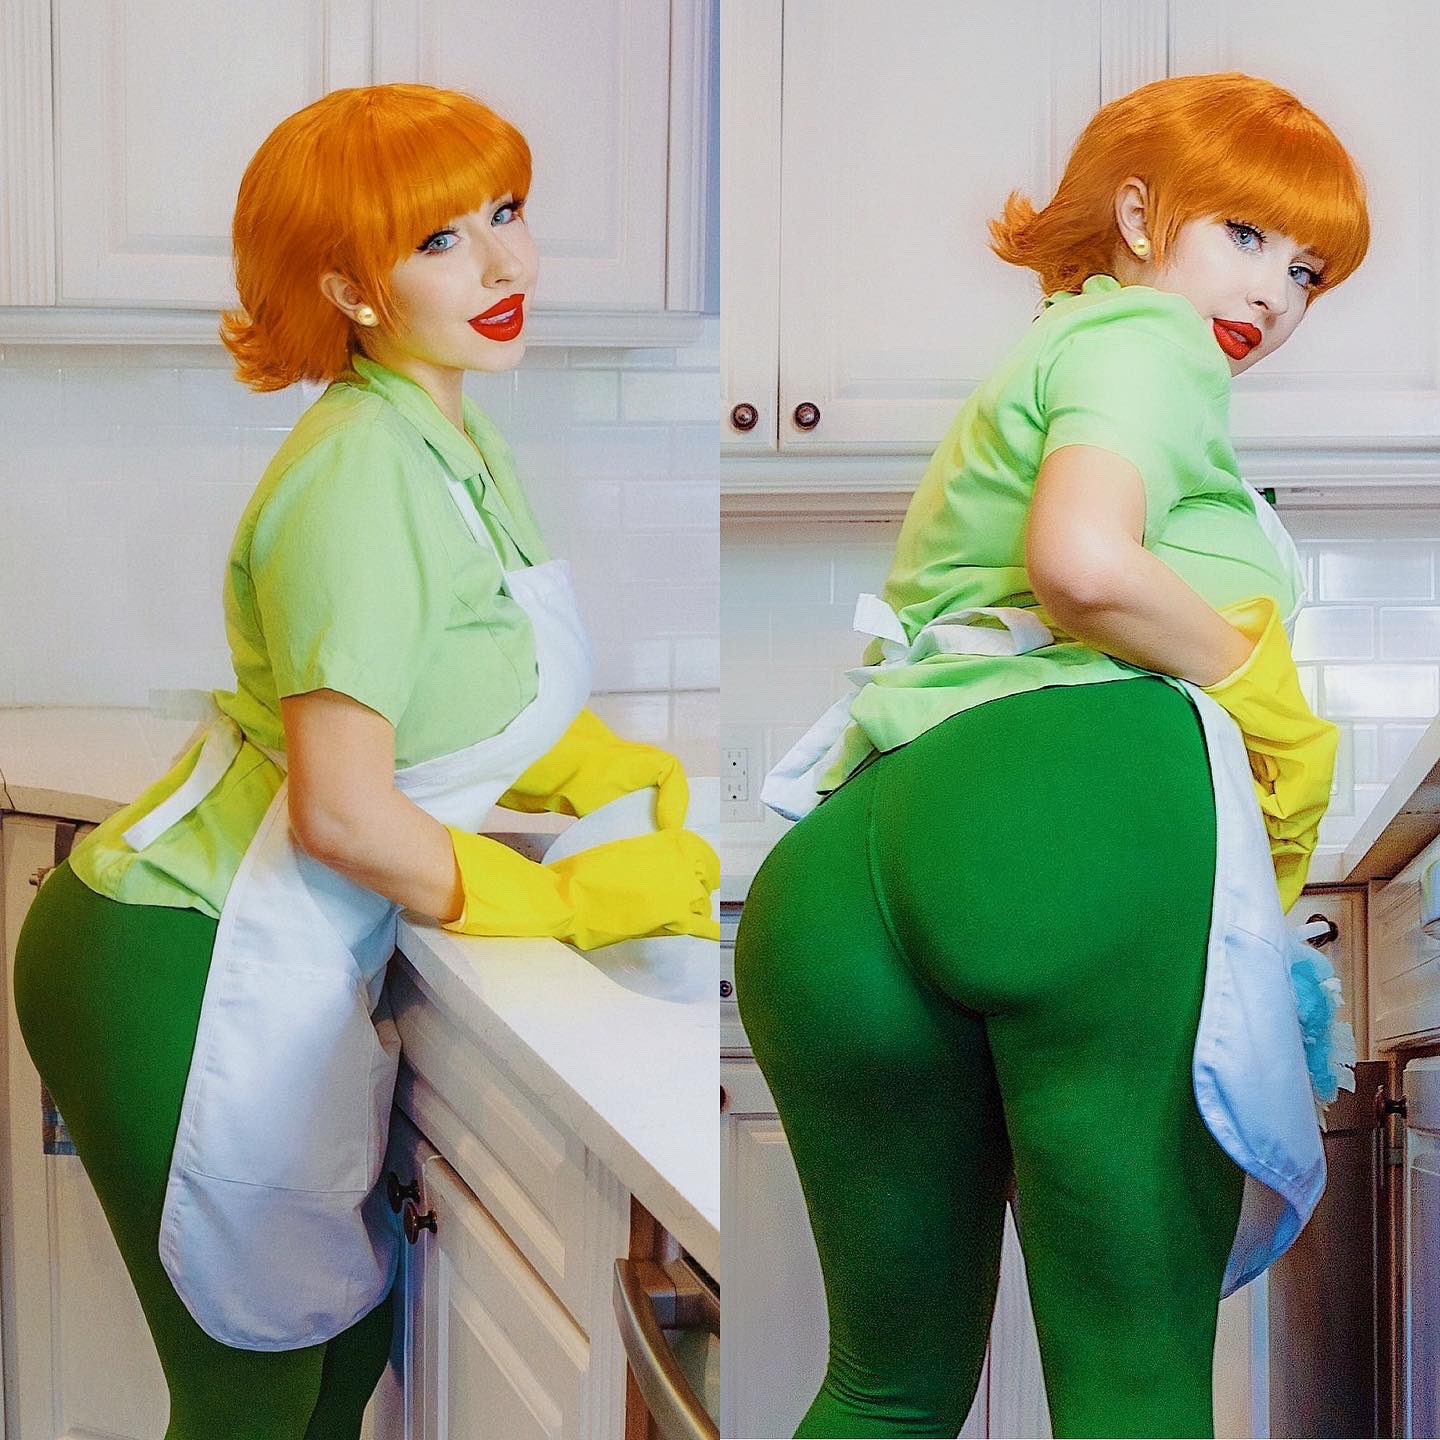 ♡Juliette Michele♡ on X: Dexter's mom from Dexter's Laboratory🧽🧼🍑💦  y'all tired of my ass yet?🍑 t.coarIjvqsgfX 💦  t.coBd1m9ToCY9  X